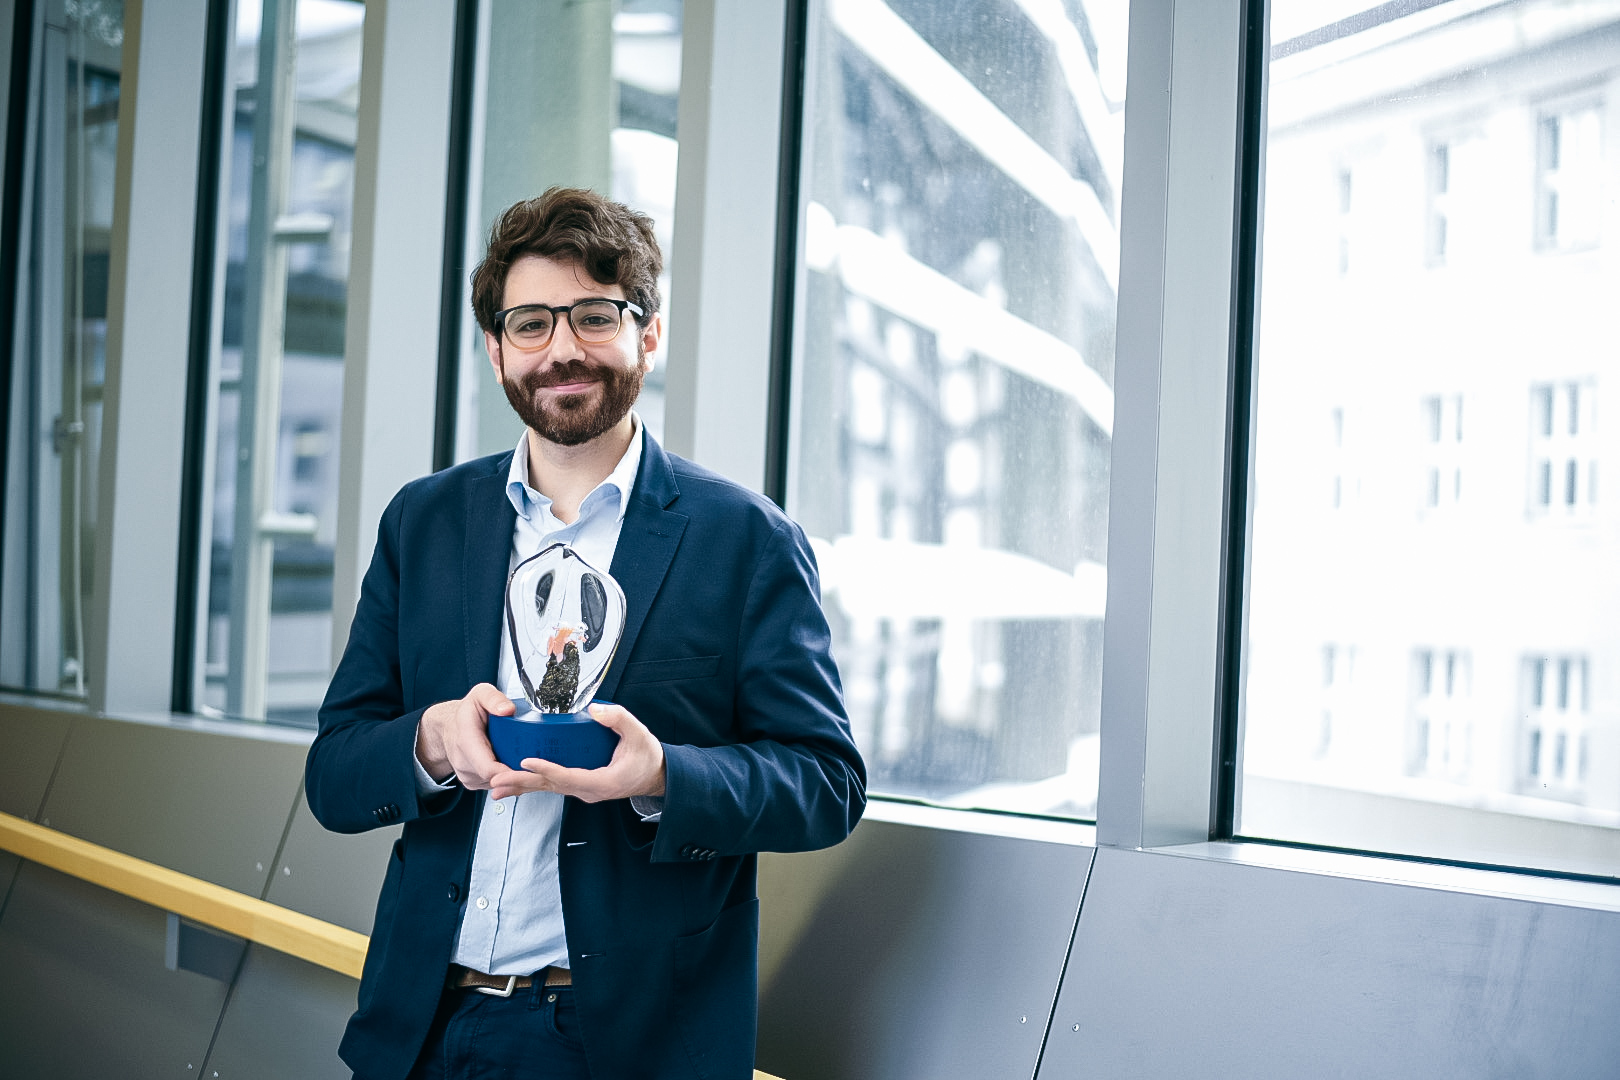 This year's winner of the Dream Chemistry Award competition is organic chemist Mark Levin with his vision for revolutionizing the synthesis of functional molecules